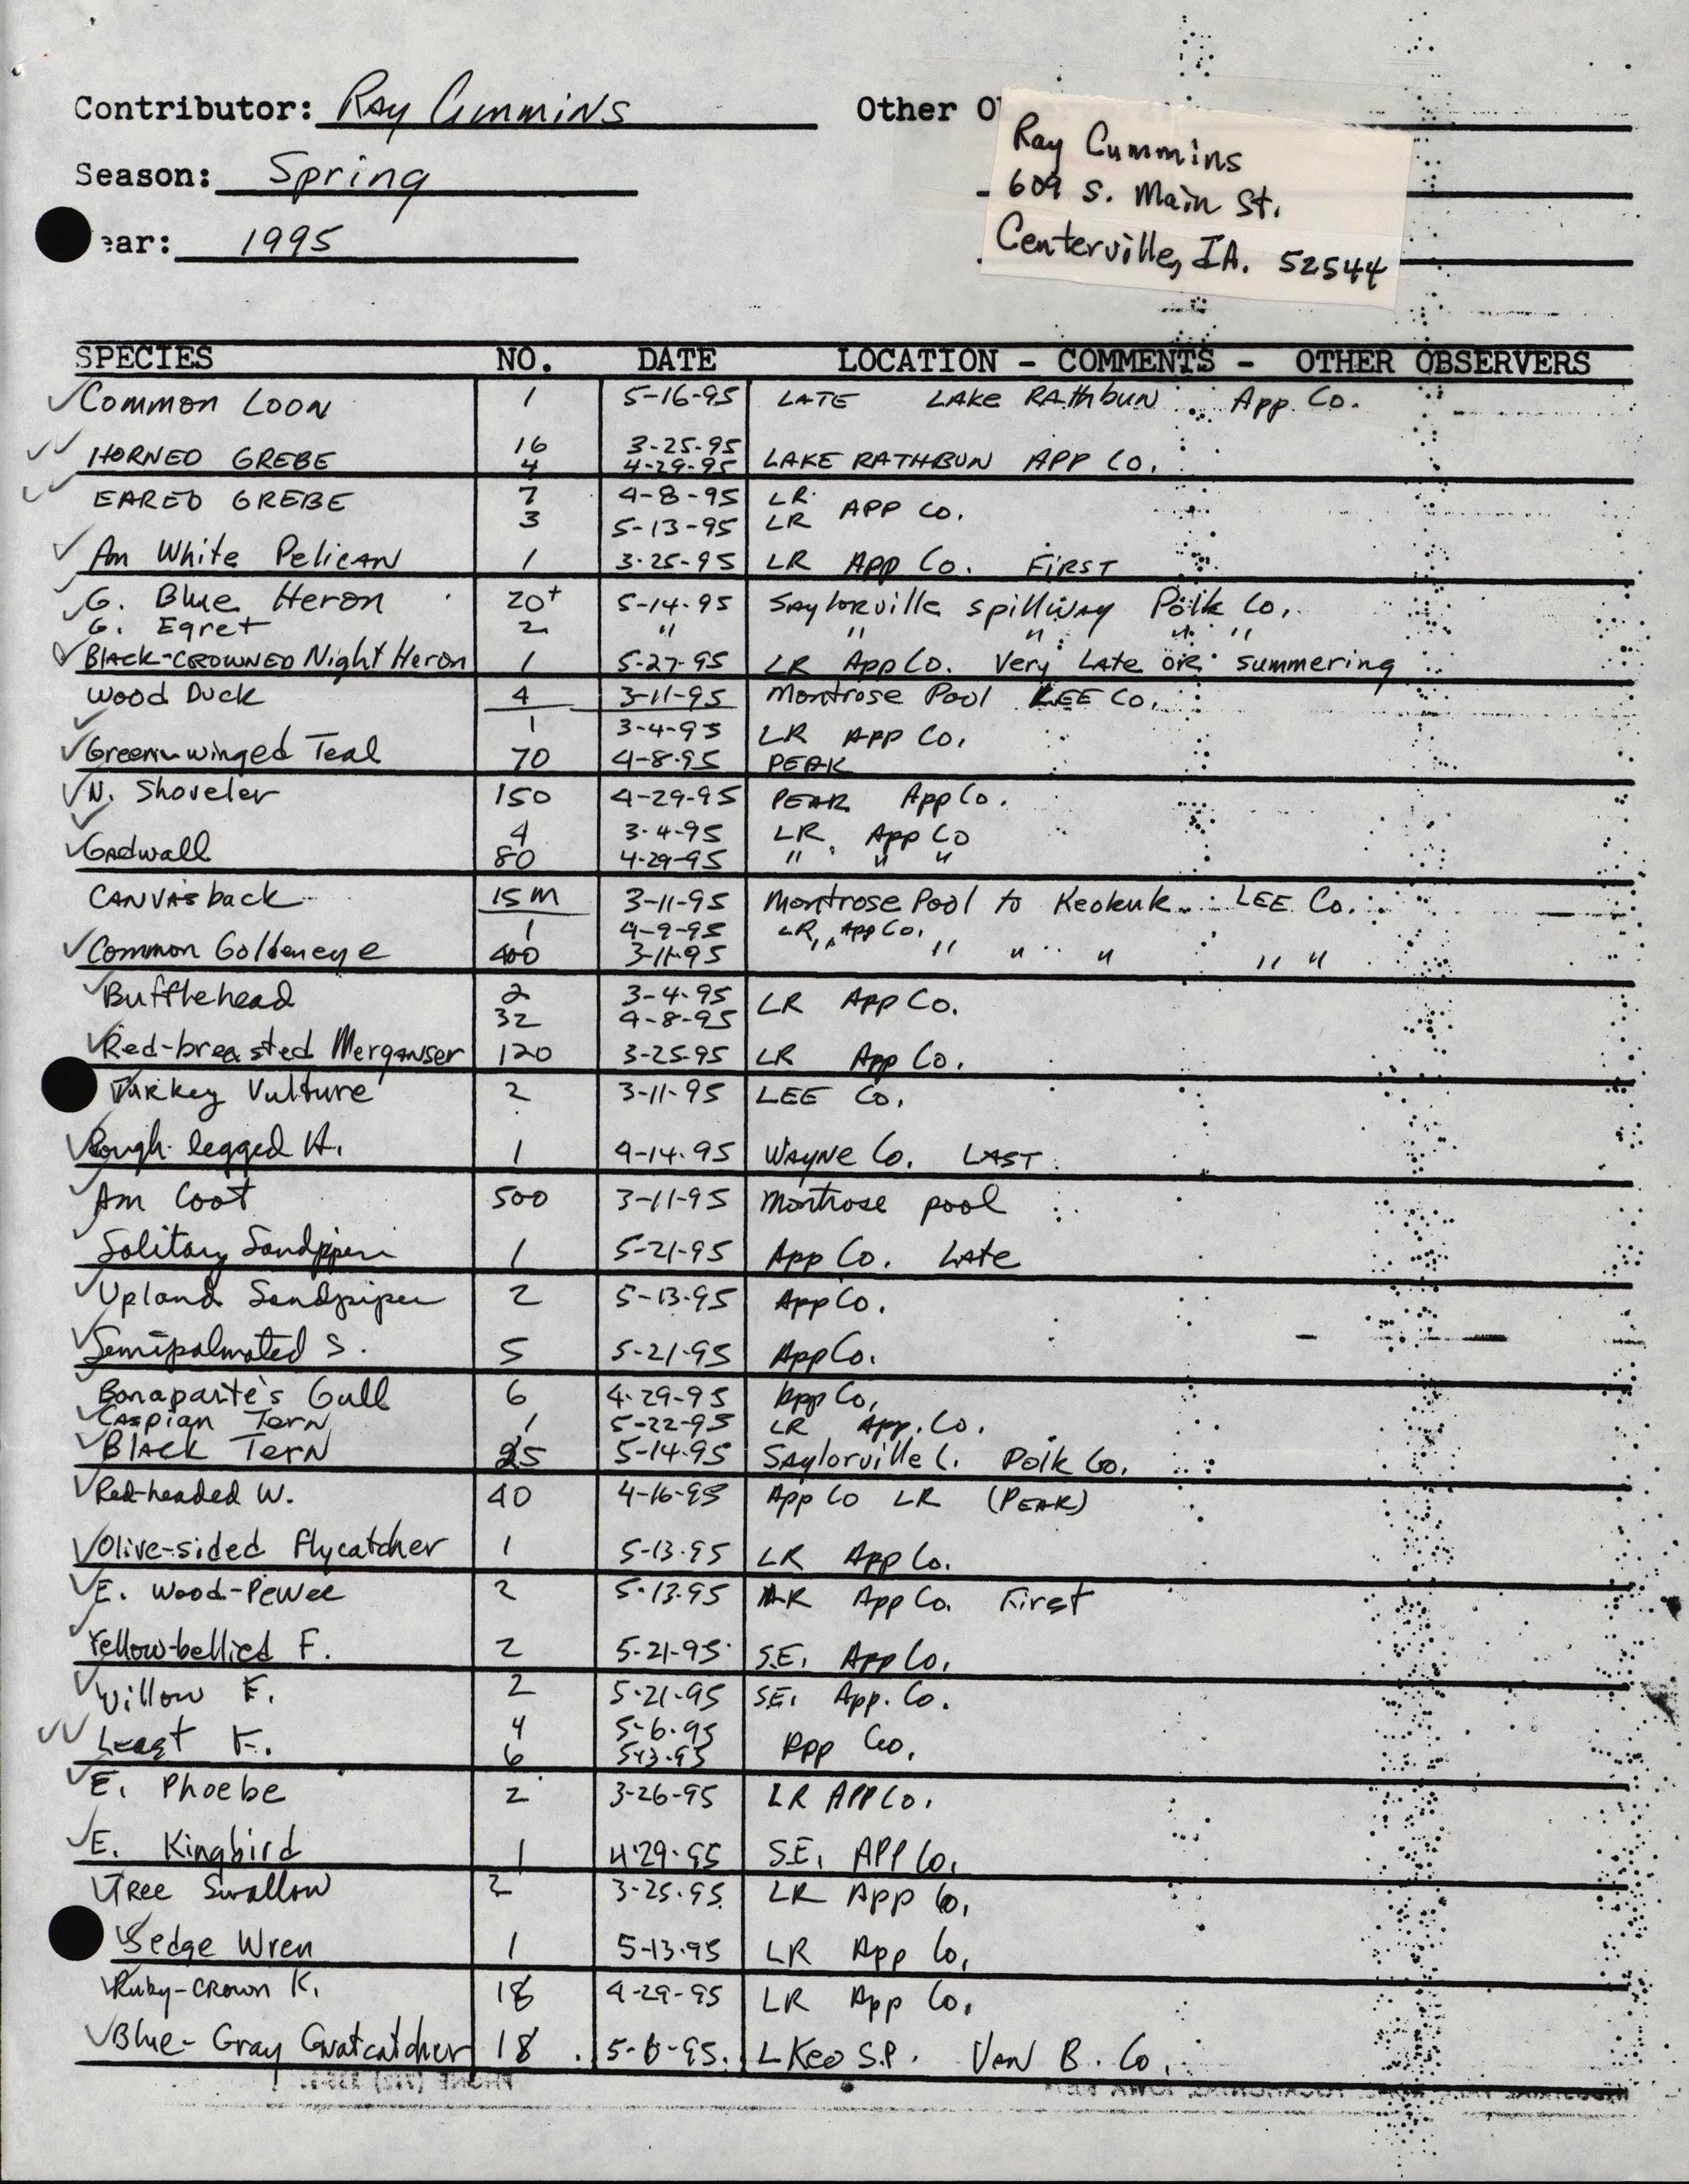 Field reports form for submitting seasonal observations of Iowa birds, spring 1995, Ray Cummins